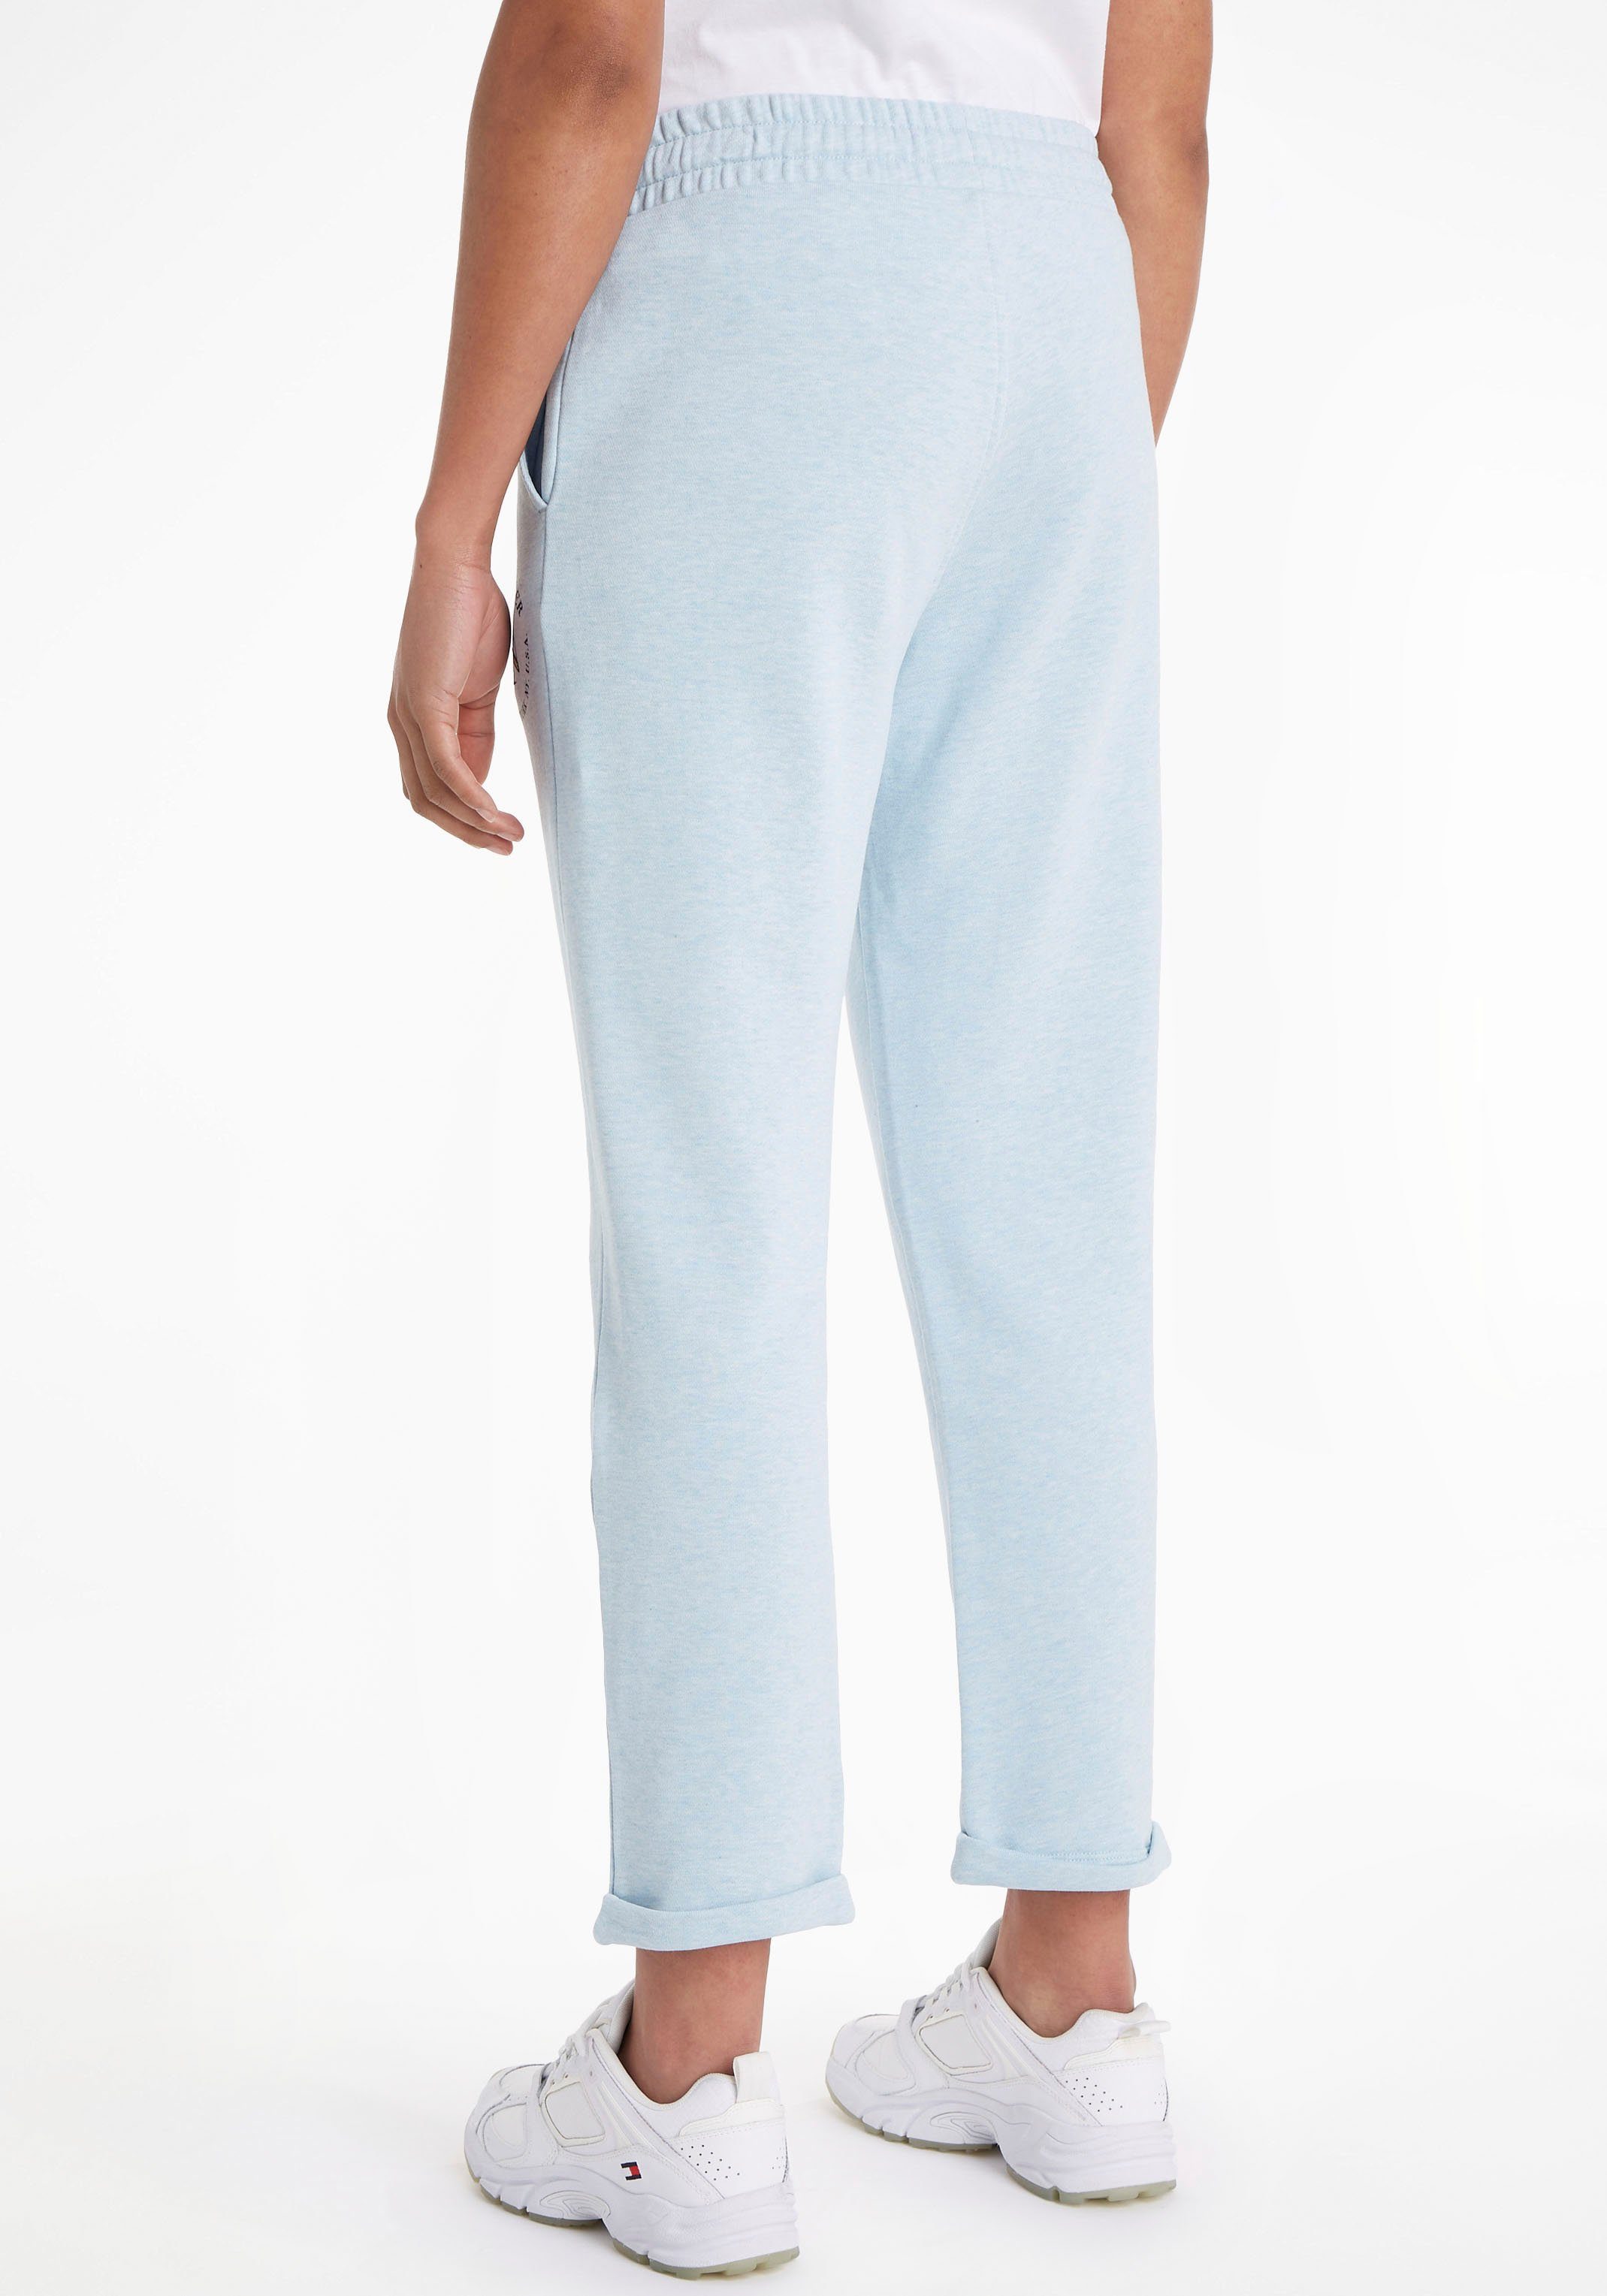 SWEATPANTS Breezy-Blue-Heather TAPERED ROUNDALL Tommy Markenlabel Tommy Sweatpants mit Hilfiger NYC Hilfiger